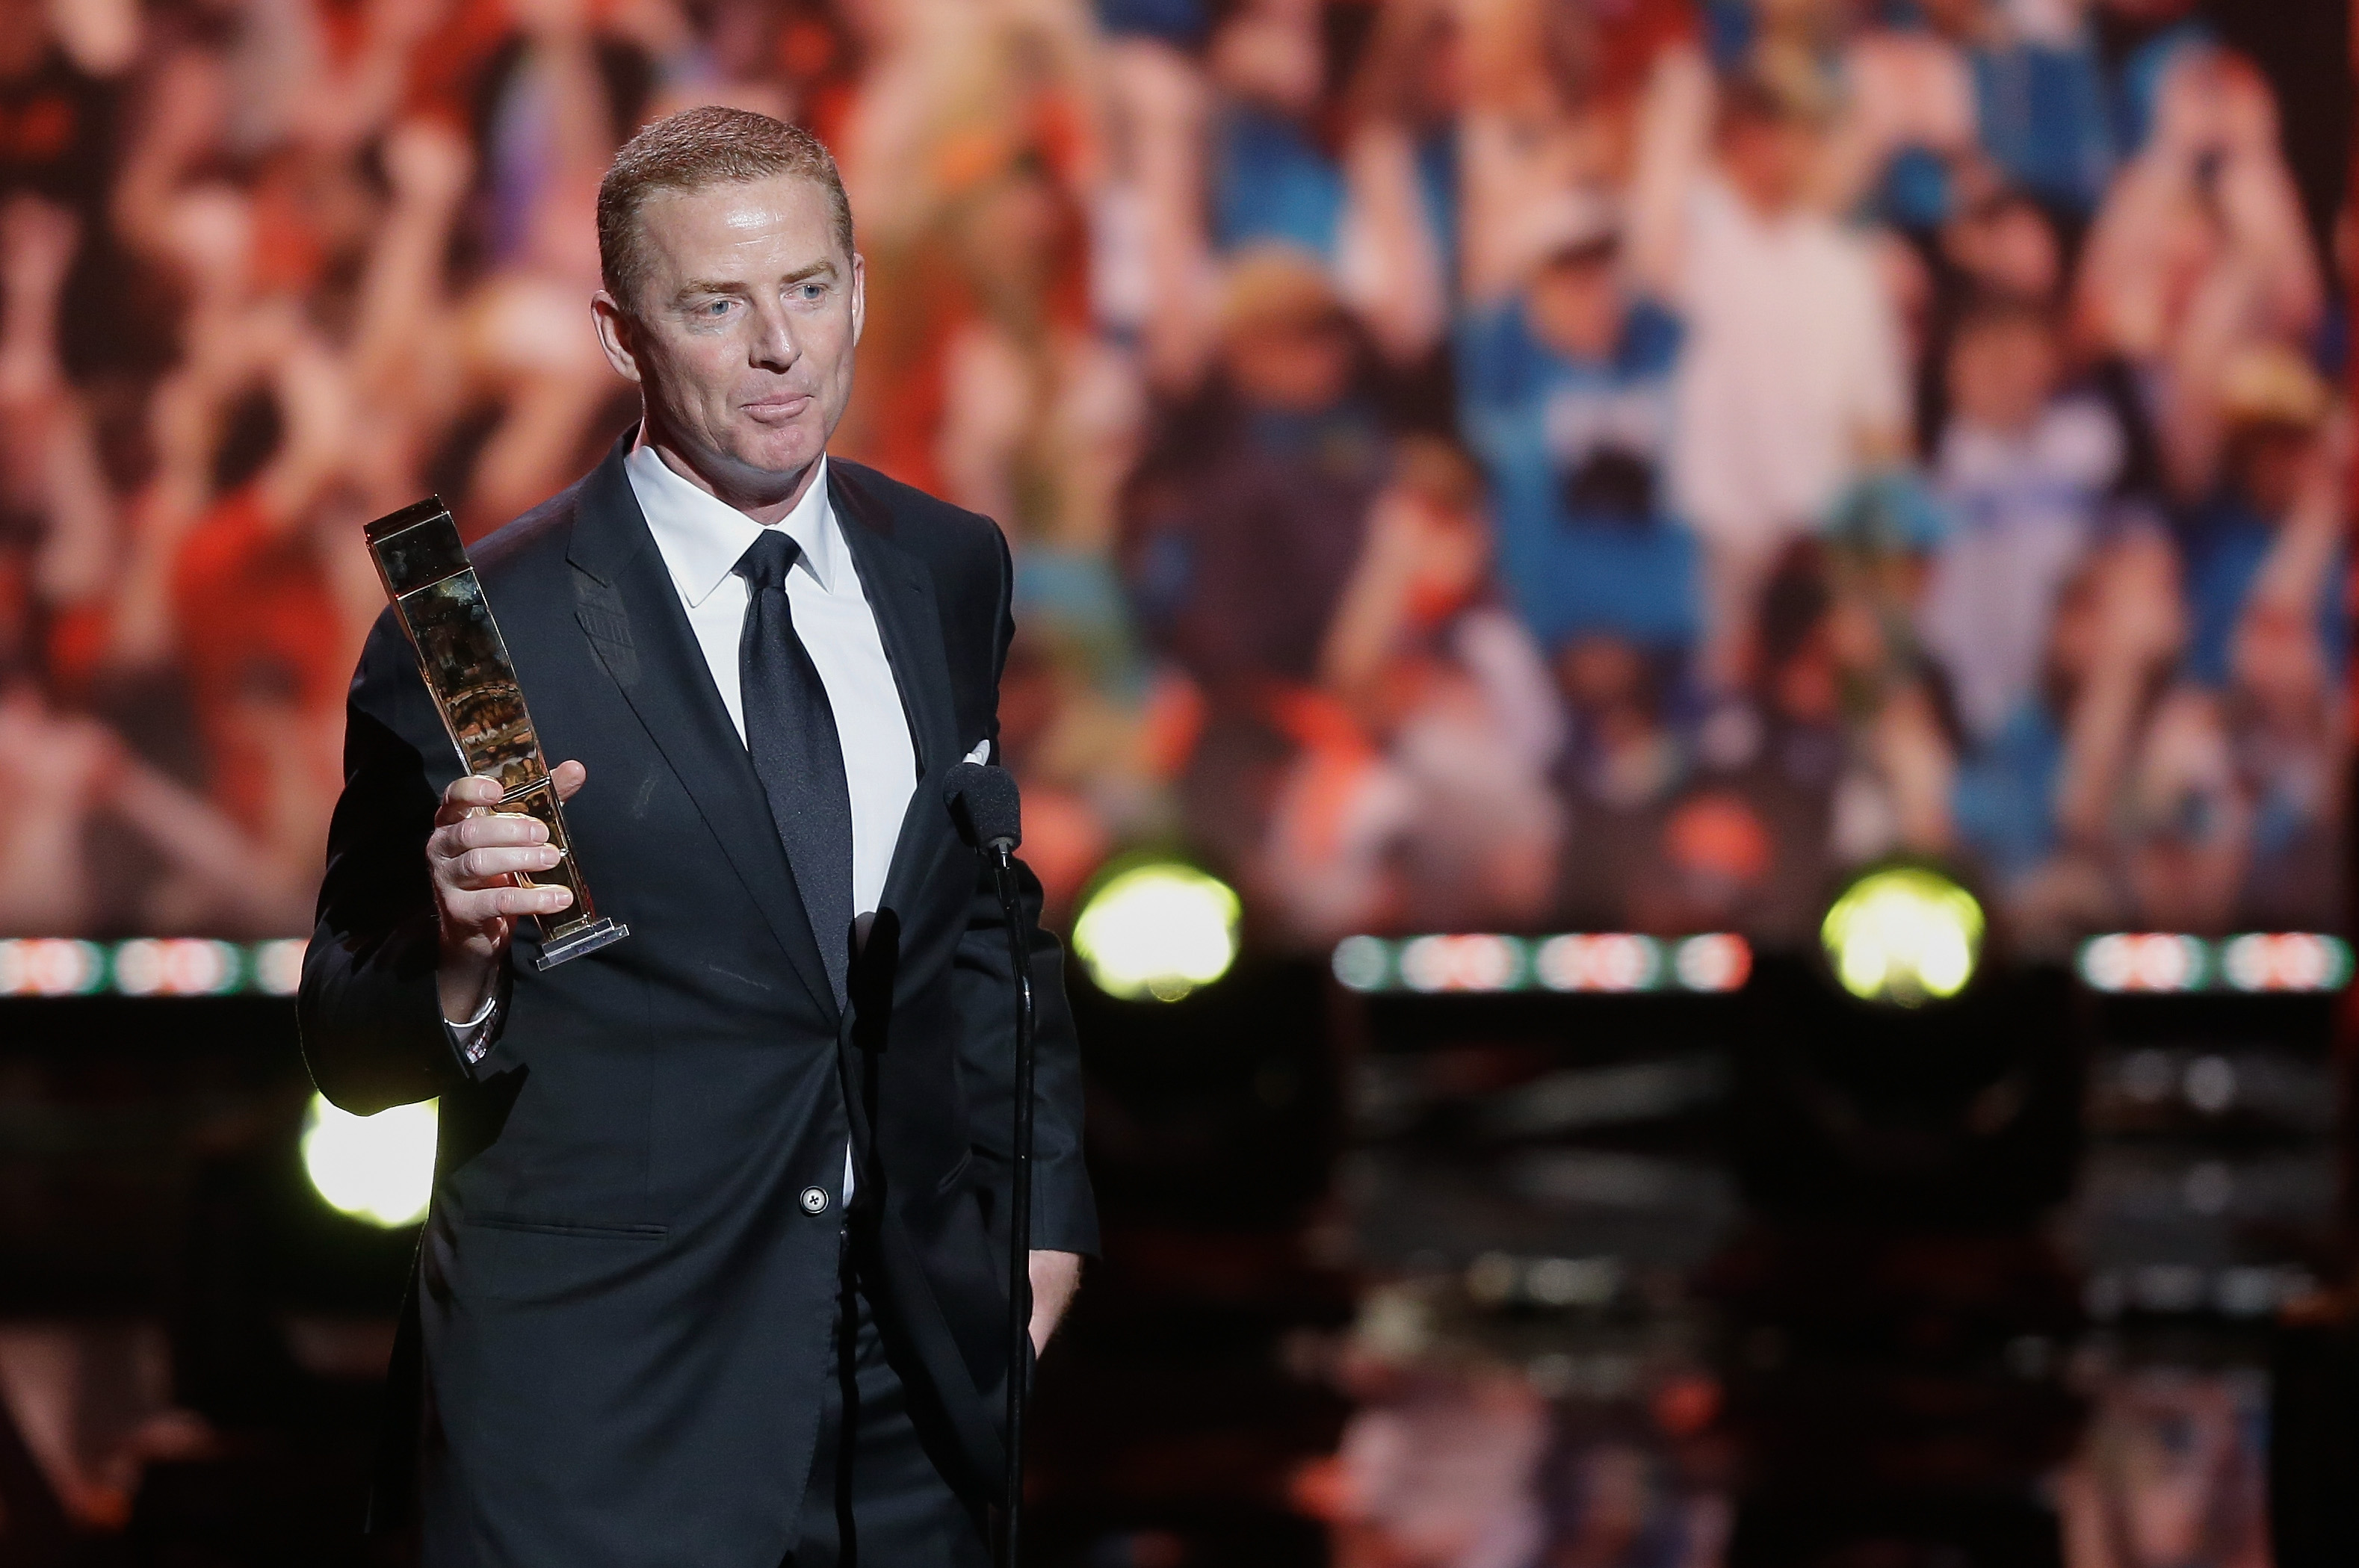 No excuses: How Jason Garrett became NFL Coach of the Year 